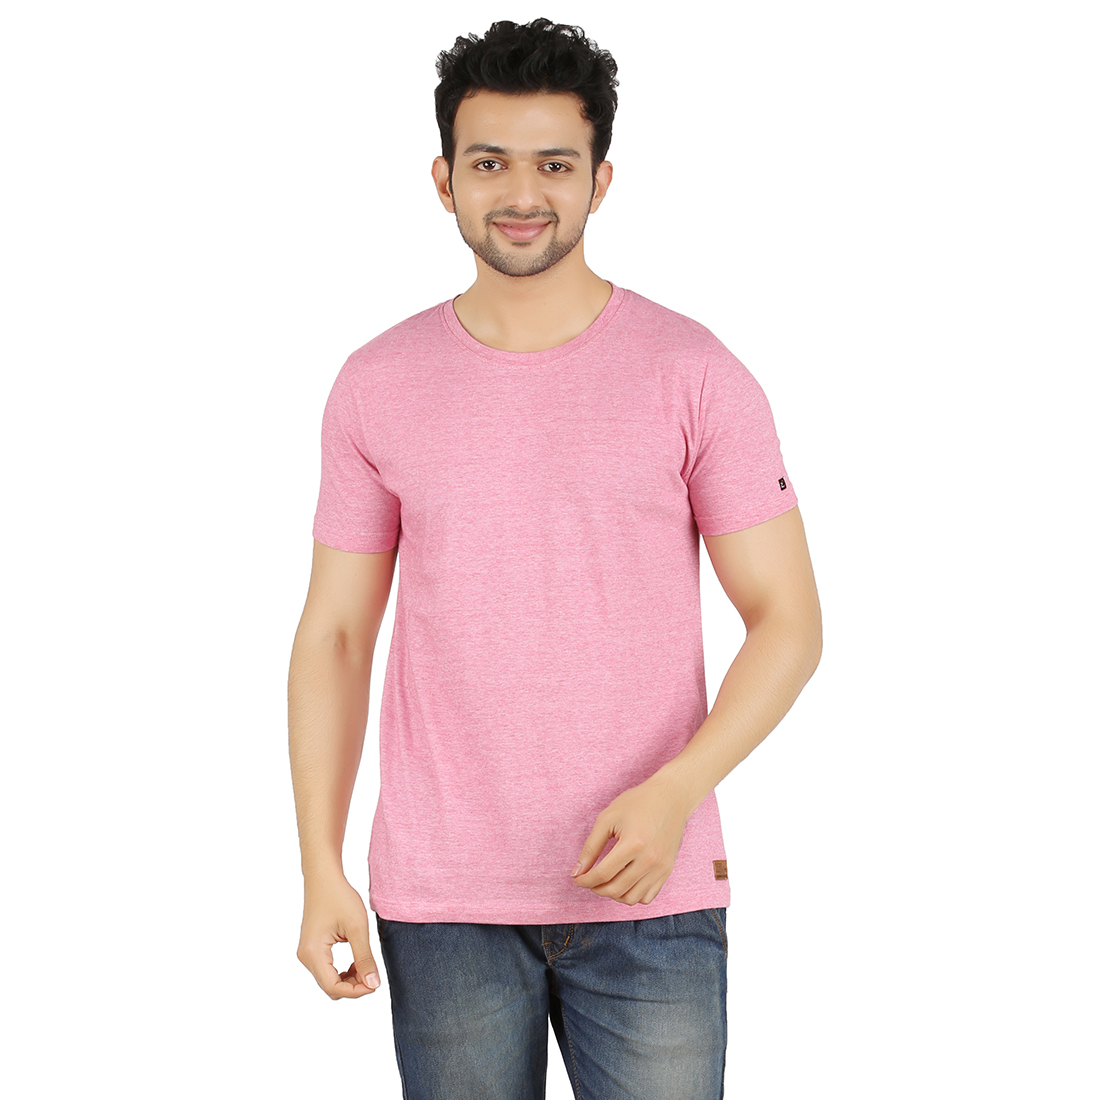 Buy Zeroonee Fashion Crew Neck T Shirts Online @ ₹399 from ShopClues